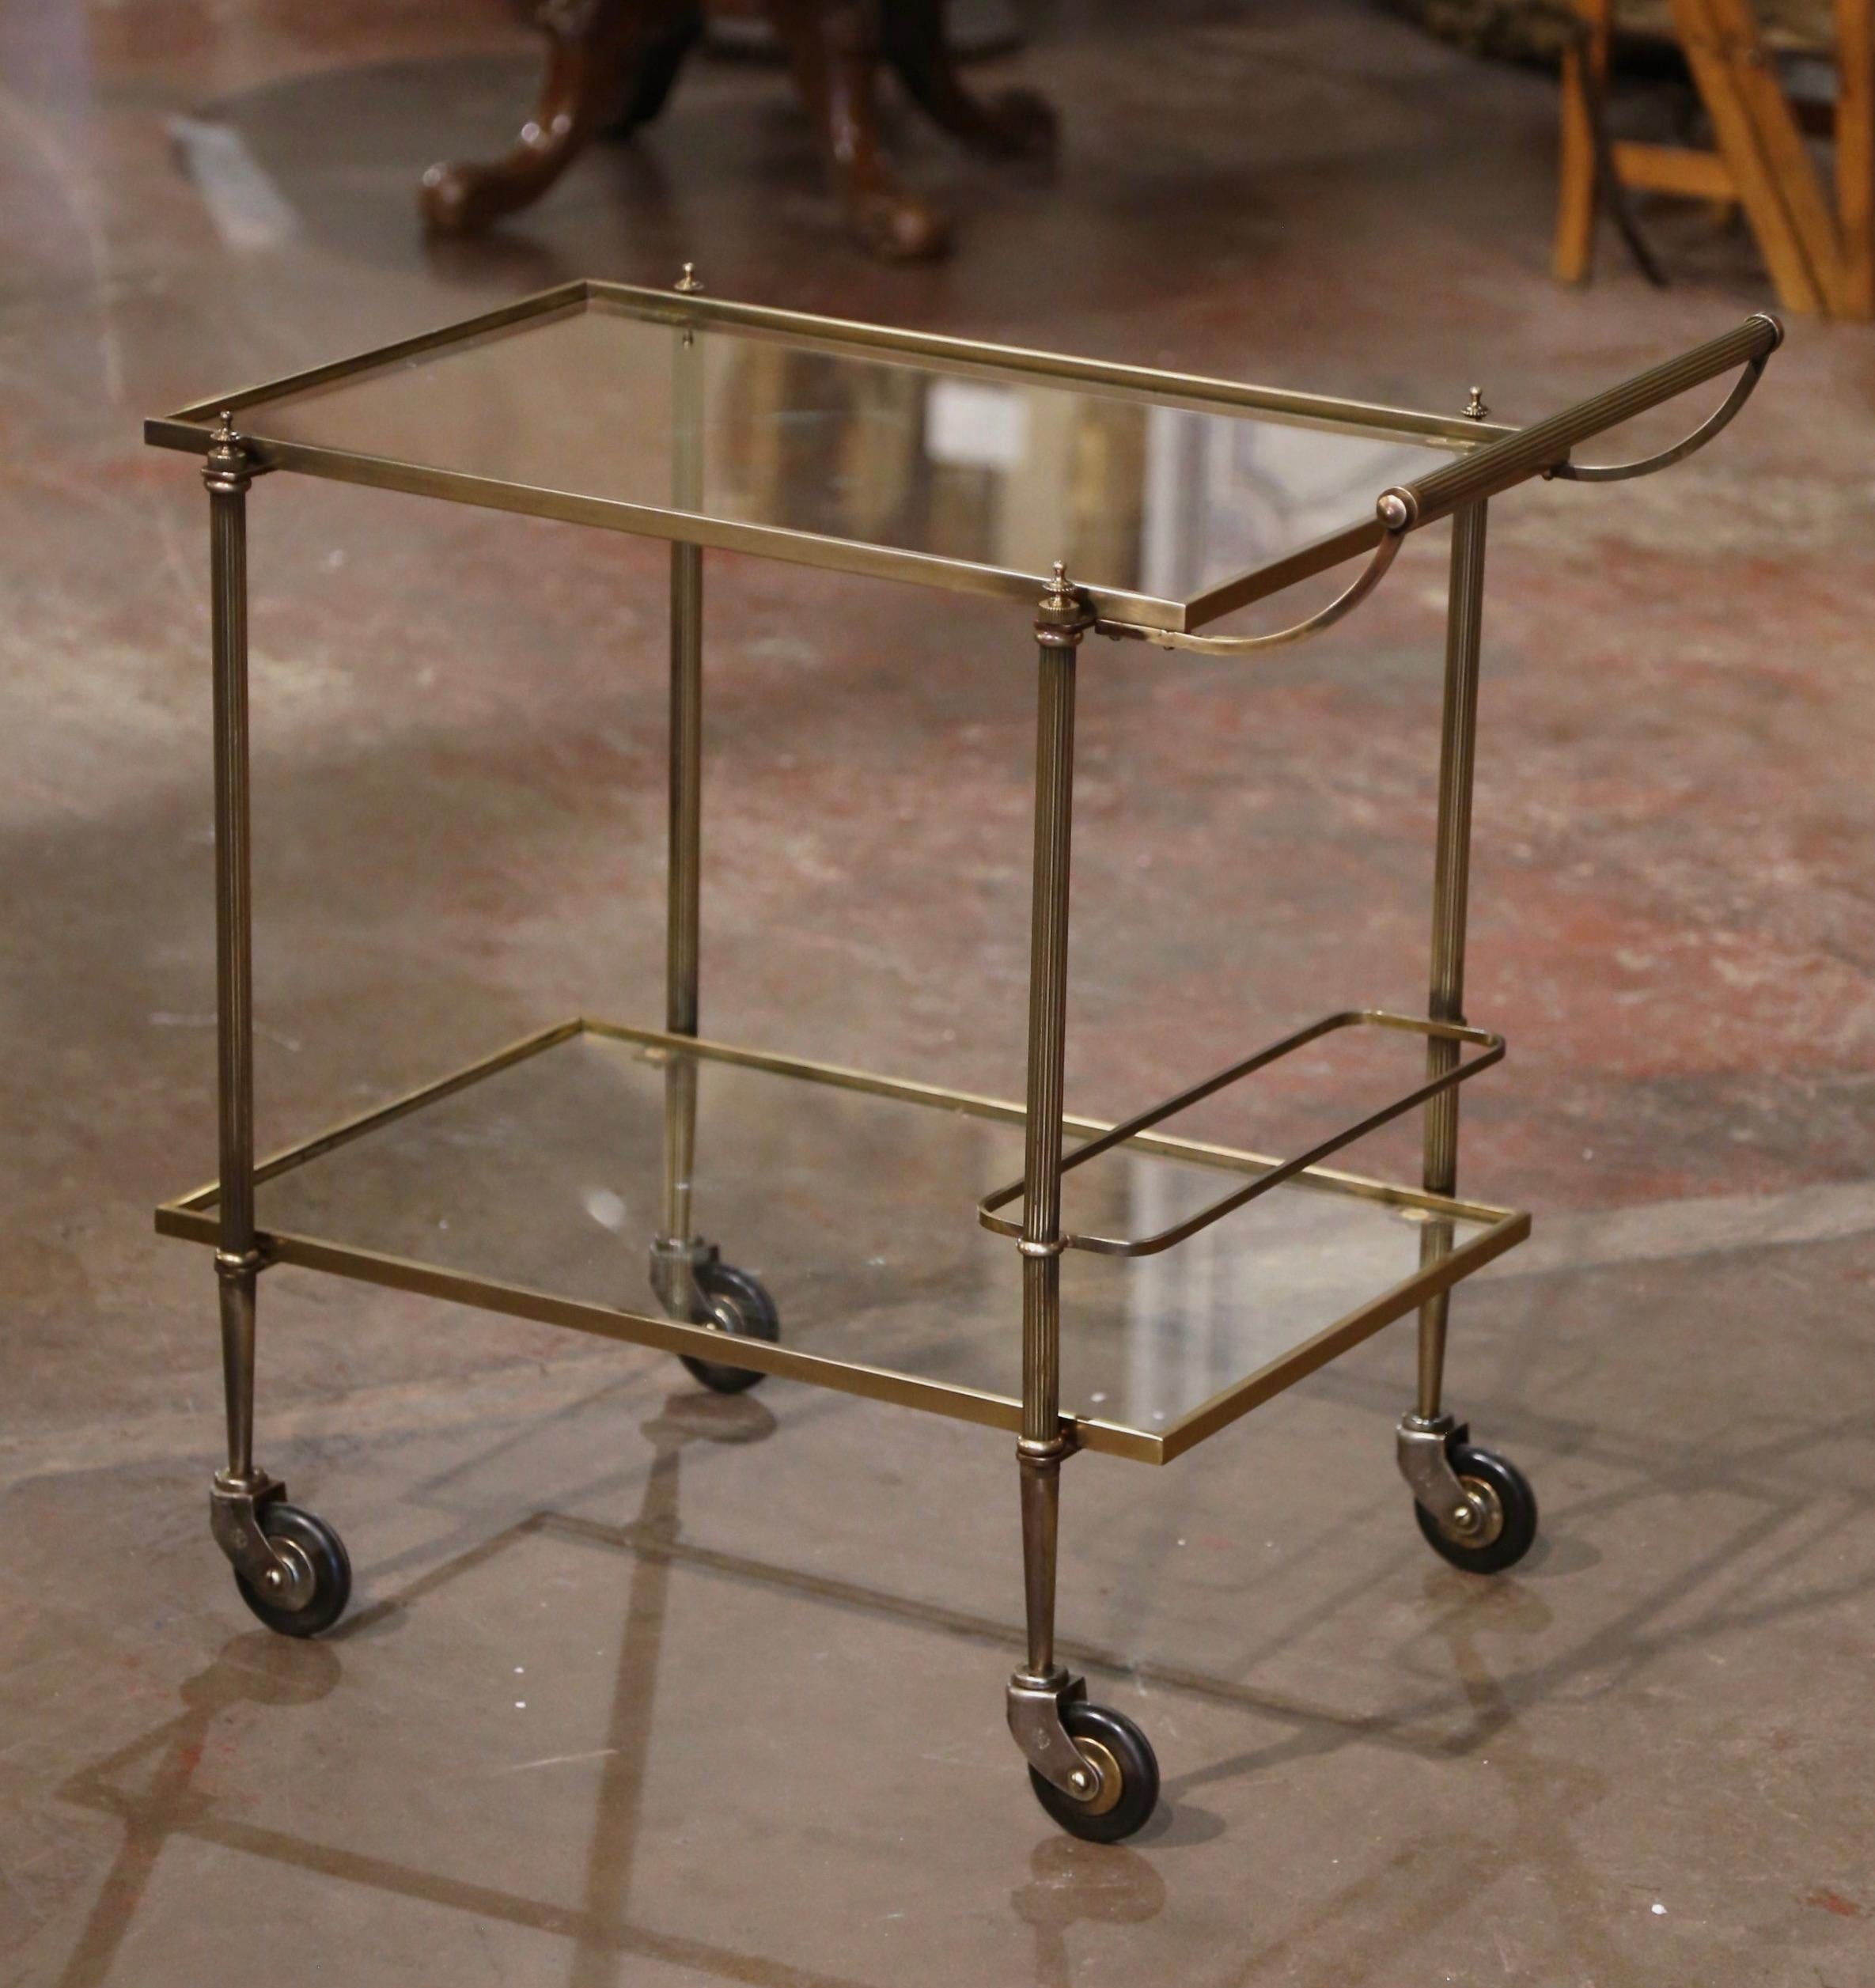 This elegant vintage rolling bar cart was created in France, circa 1960. Built in brass a with a rectangle shape, the two-tier dessert trolley stands on small round wheels with rubber tires, and two glass surfaces. The top deck features a